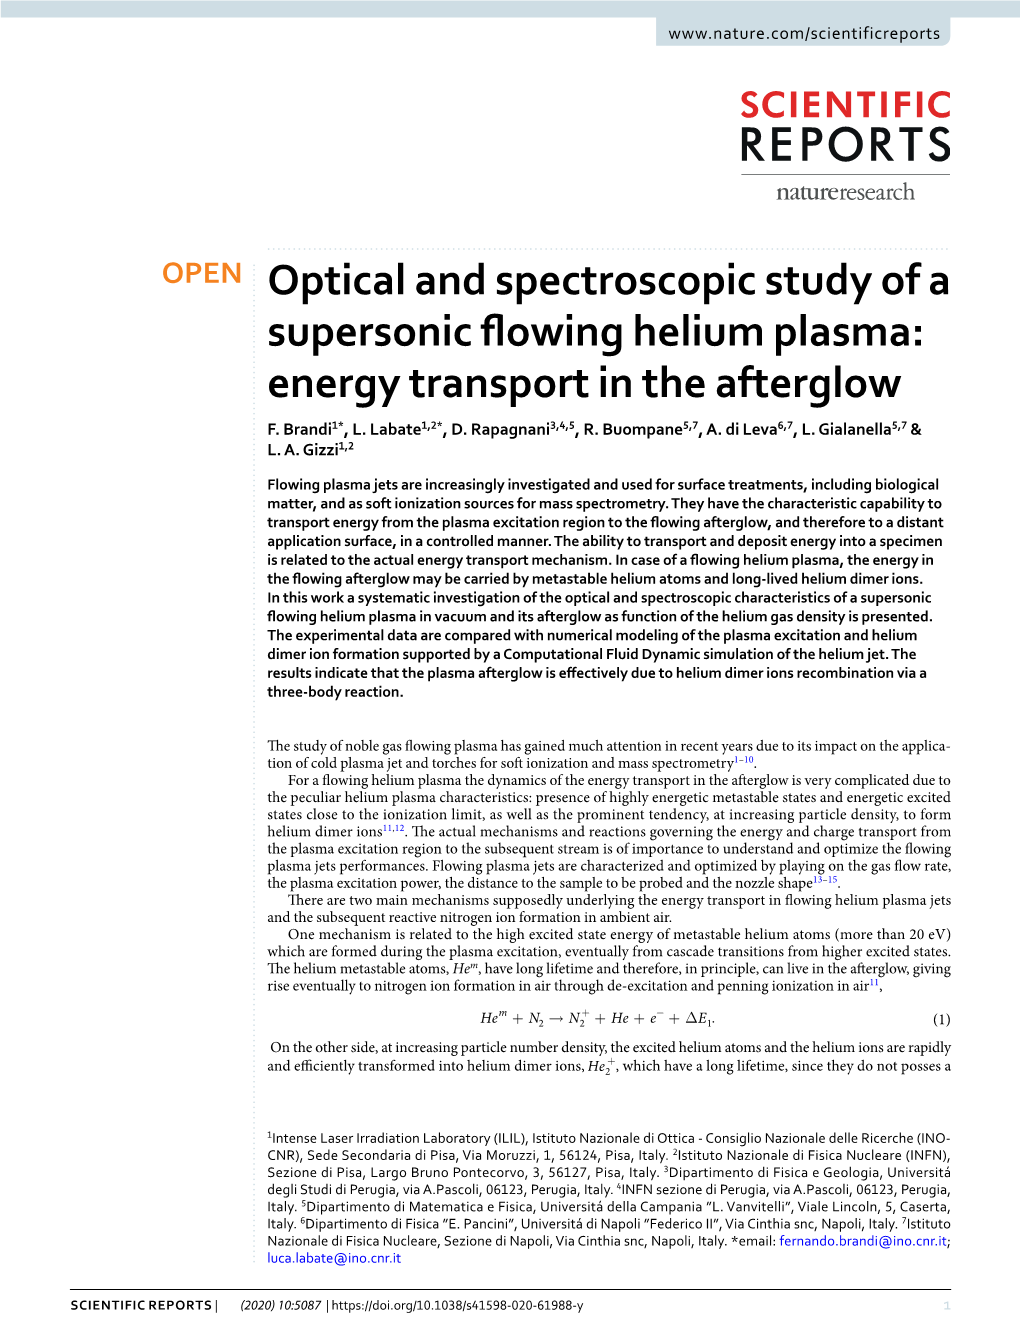 Optical and Spectroscopic Study of a Supersonic Flowing Helium Plasma